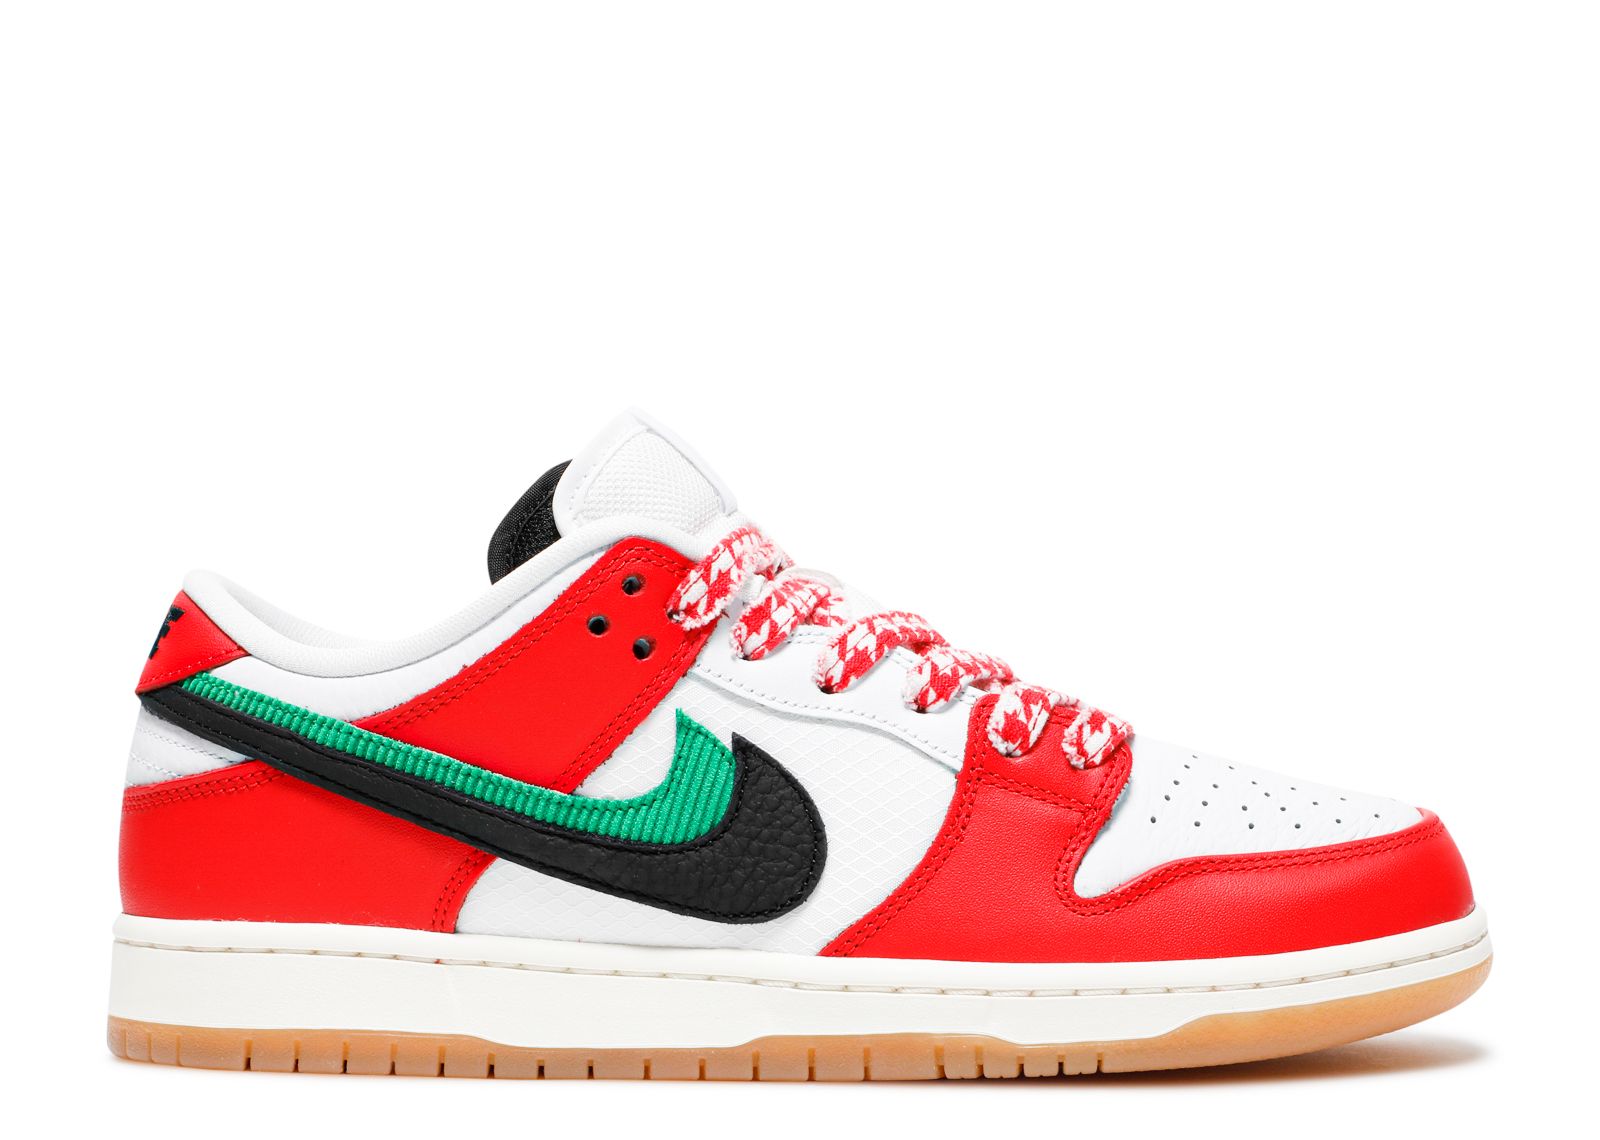 Frame X Dunk Low SB - Nike - CT2550 600 - chile red/white/lucky green/black Flight